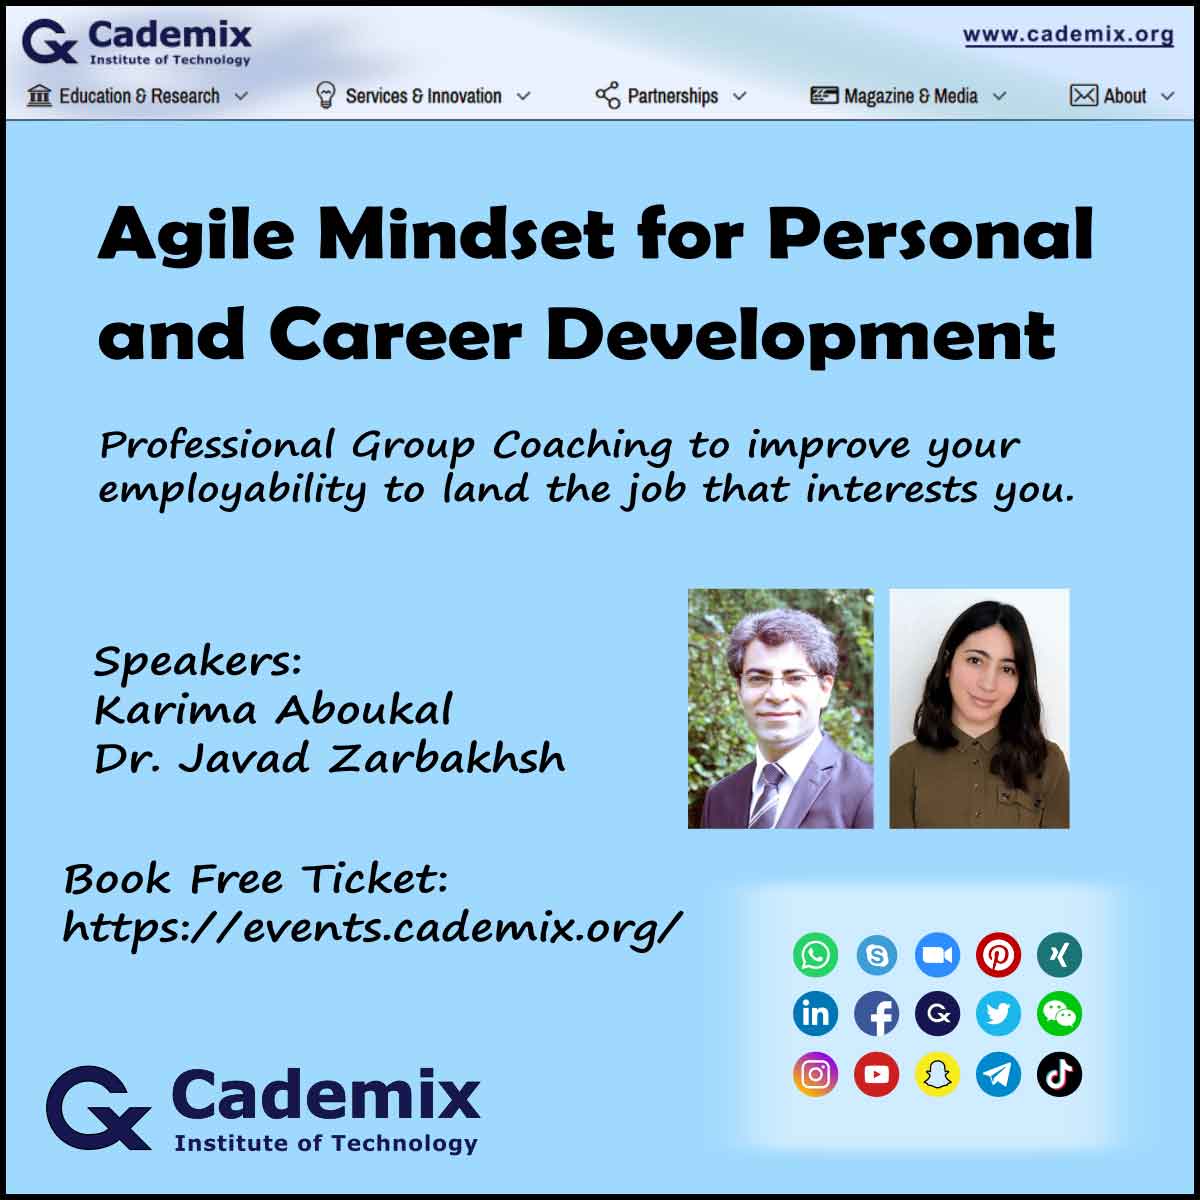 Cademix Event Online Karima Aboukal Agile Mindset for Personal and Career Development